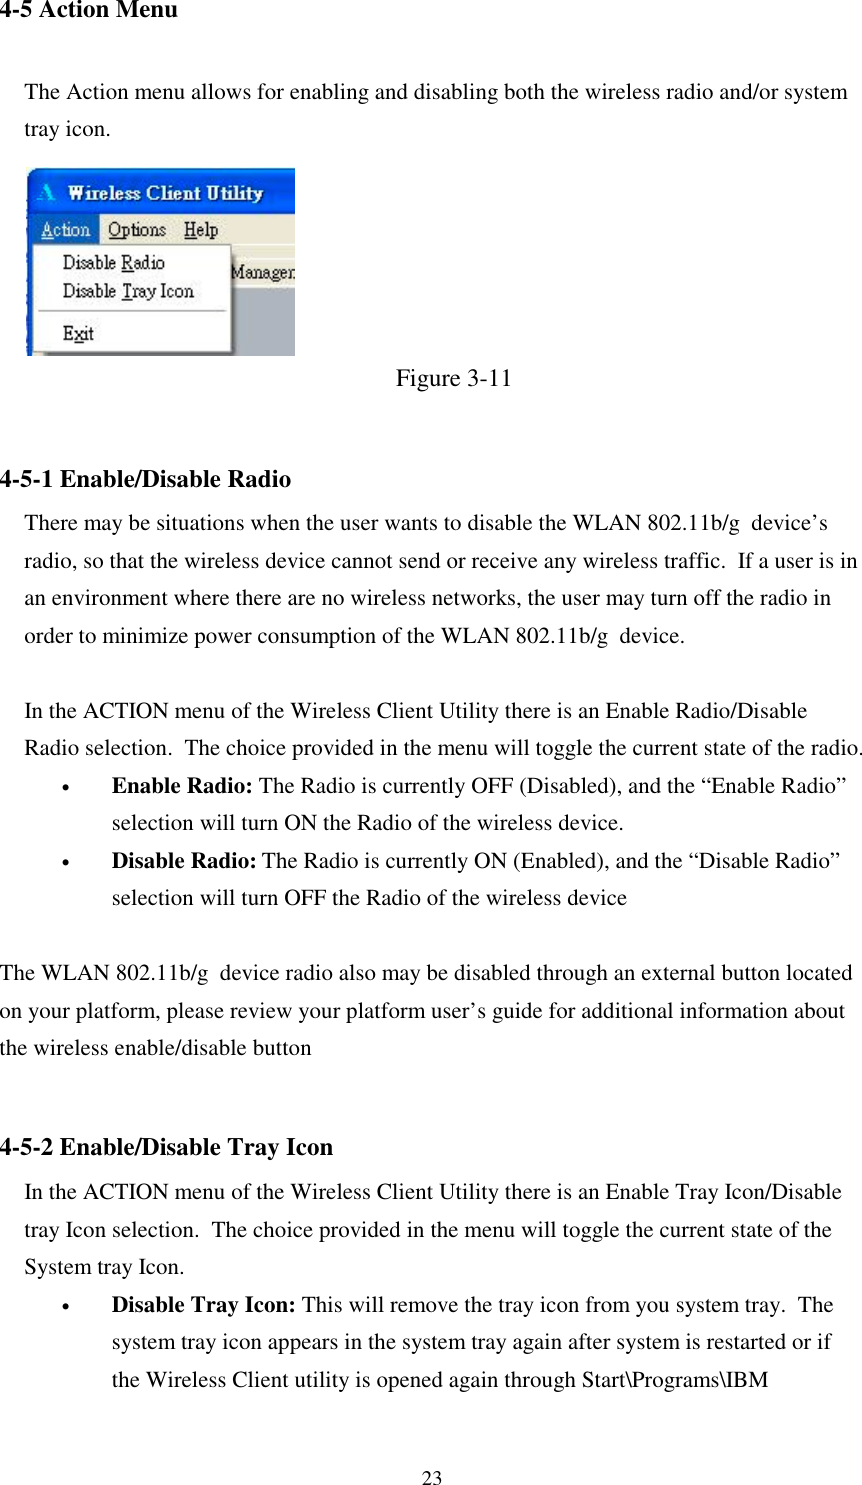 234-5 Action MenuThe Action menu allows for enabling and disabling both the wireless radio and/or systemtray icon.Figure 3-114-5-1 Enable/Disable RadioThere may be situations when the user wants to disable the WLAN 802.11b/g  device’sradio, so that the wireless device cannot send or receive any wireless traffic.  If a user is inan environment where there are no wireless networks, the user may turn off the radio inorder to minimize power consumption of the WLAN 802.11b/g  device.In the ACTION menu of the Wireless Client Utility there is an Enable Radio/DisableRadio selection.  The choice provided in the menu will toggle the current state of the radio.• Enable Radio: The Radio is currently OFF (Disabled), and the “Enable Radio”selection will turn ON the Radio of the wireless device.• Disable Radio: The Radio is currently ON (Enabled), and the “Disable Radio”selection will turn OFF the Radio of the wireless deviceThe WLAN 802.11b/g  device radio also may be disabled through an external button locatedon your platform, please review your platform user’s guide for additional information aboutthe wireless enable/disable button4-5-2 Enable/Disable Tray IconIn the ACTION menu of the Wireless Client Utility there is an Enable Tray Icon/Disabletray Icon selection.  The choice provided in the menu will toggle the current state of theSystem tray Icon.• Disable Tray Icon: This will remove the tray icon from you system tray.  Thesystem tray icon appears in the system tray again after system is restarted or ifthe Wireless Client utility is opened again through Start\Programs\IBM